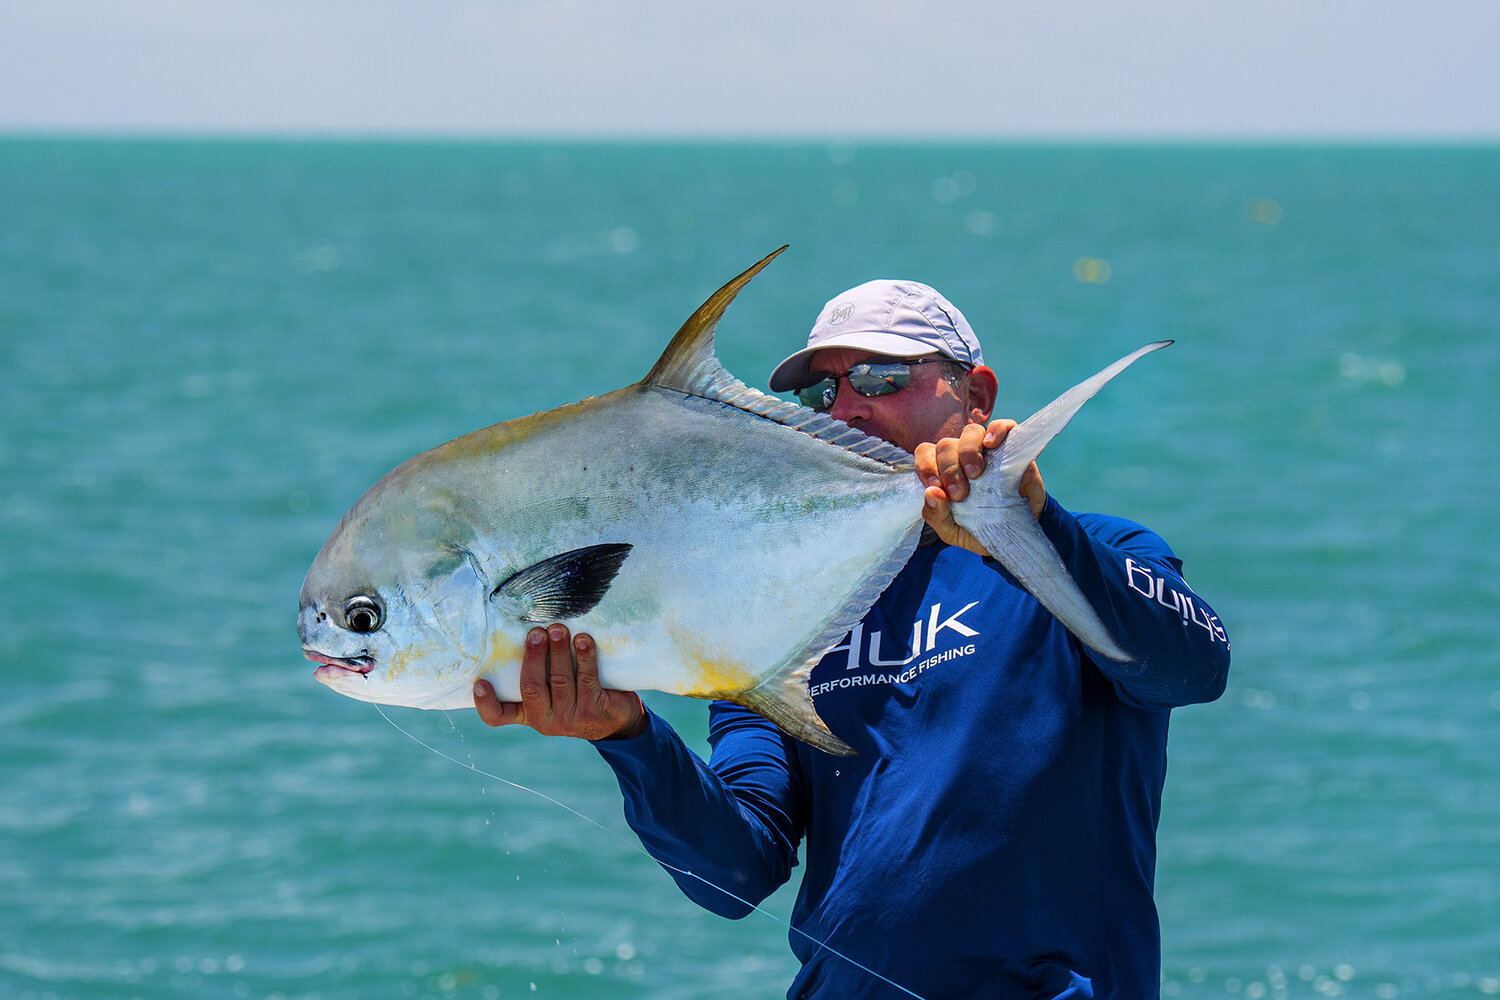 Permit Fishing 101 - How To Catch A Permit On Fly Featuring Capt Brandon  Cyr and Capt Tom Rowland — Tom Rowland Podcast